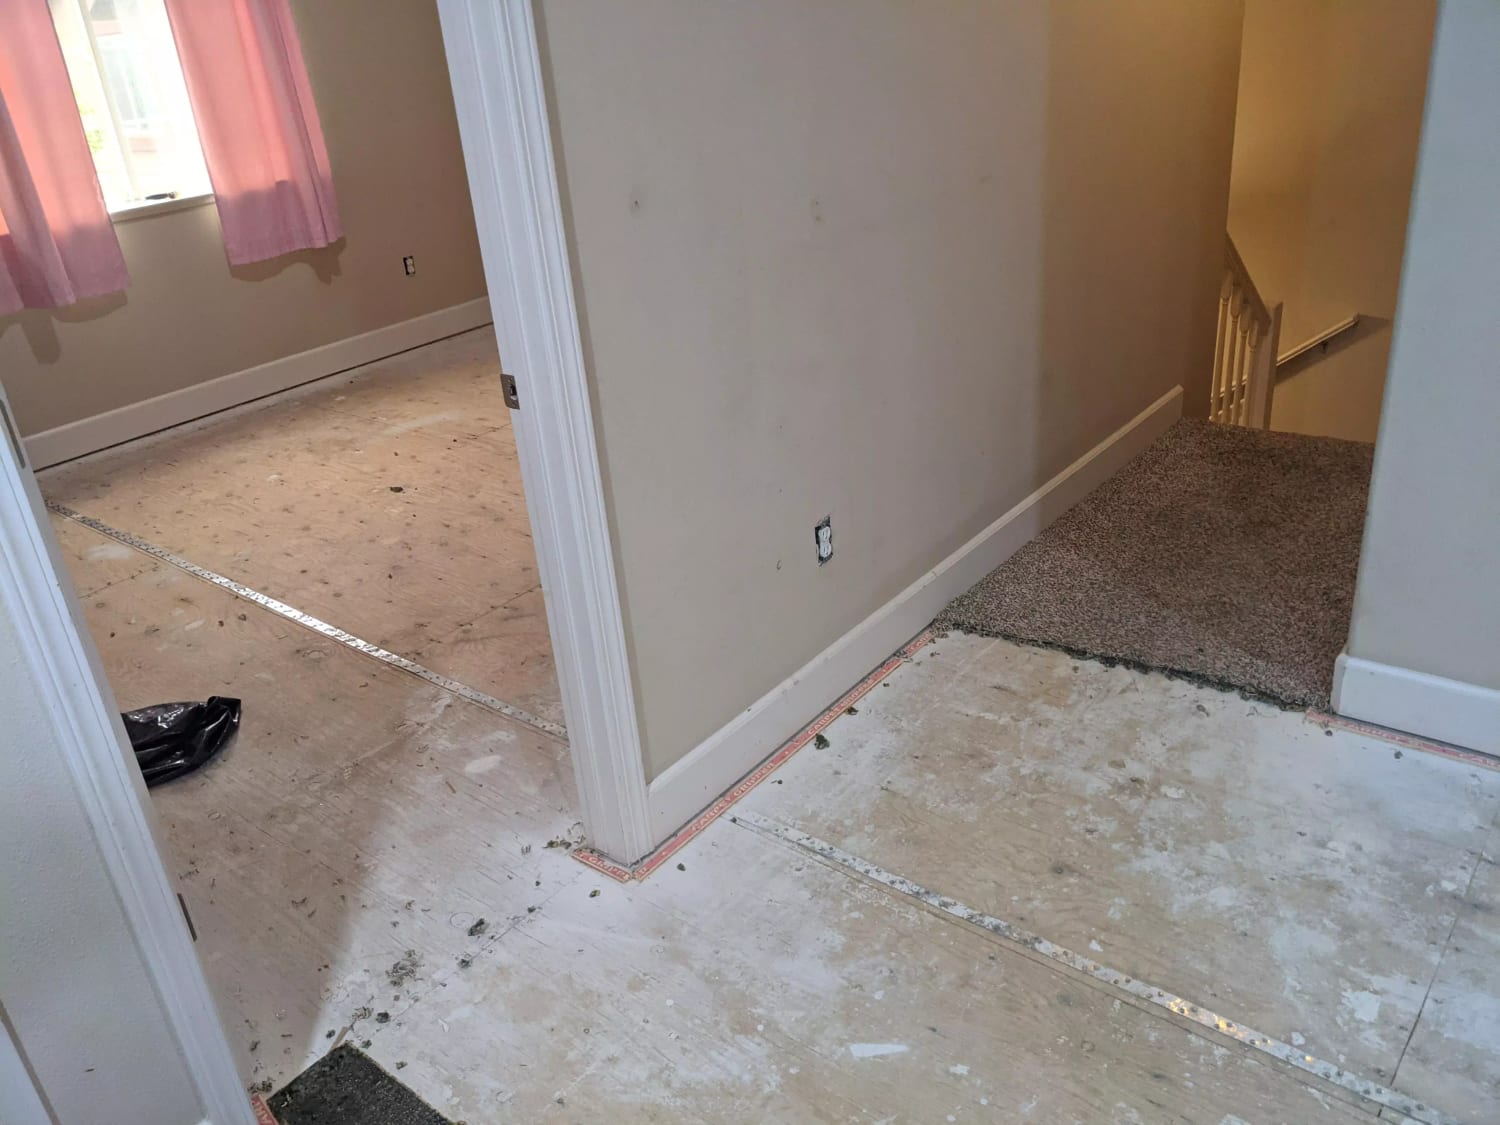 First time LVP install, what is this metal strip on 2nd floor subflooring? Safe to go over or remove for install?